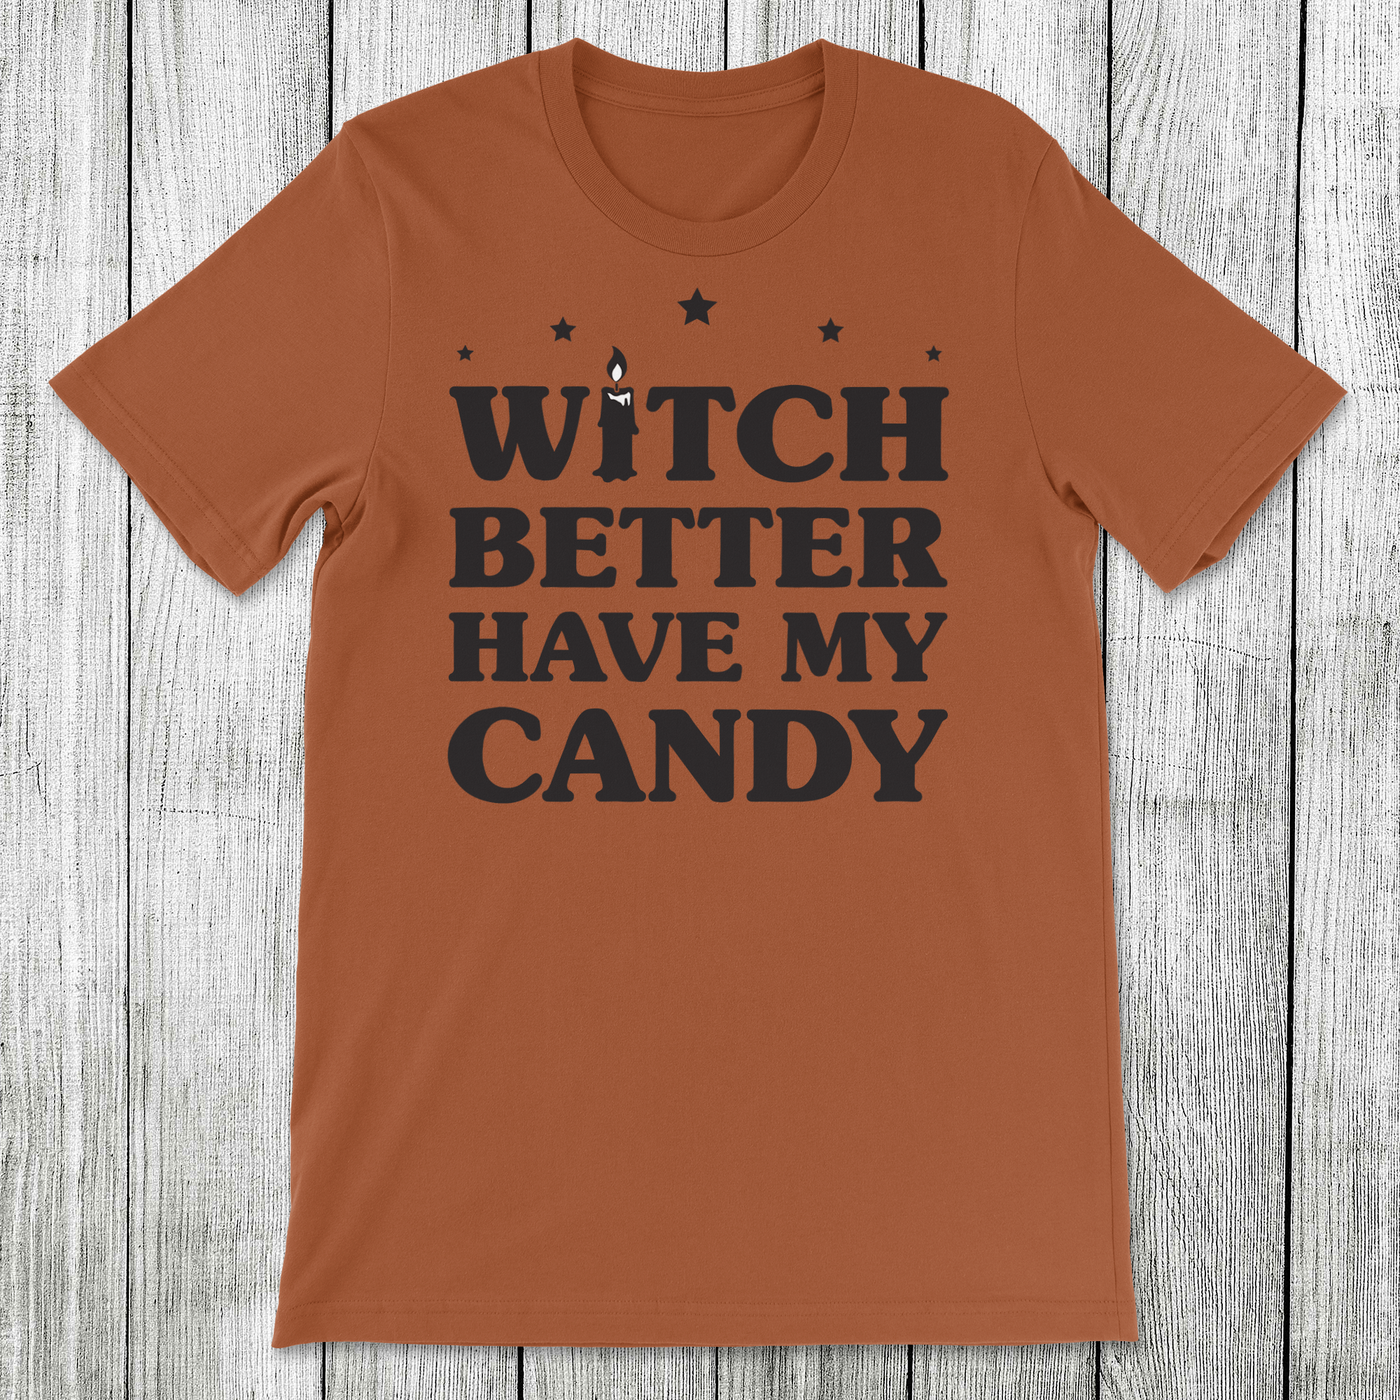 Daydream Tees Witch Better Have My Candy Autumn